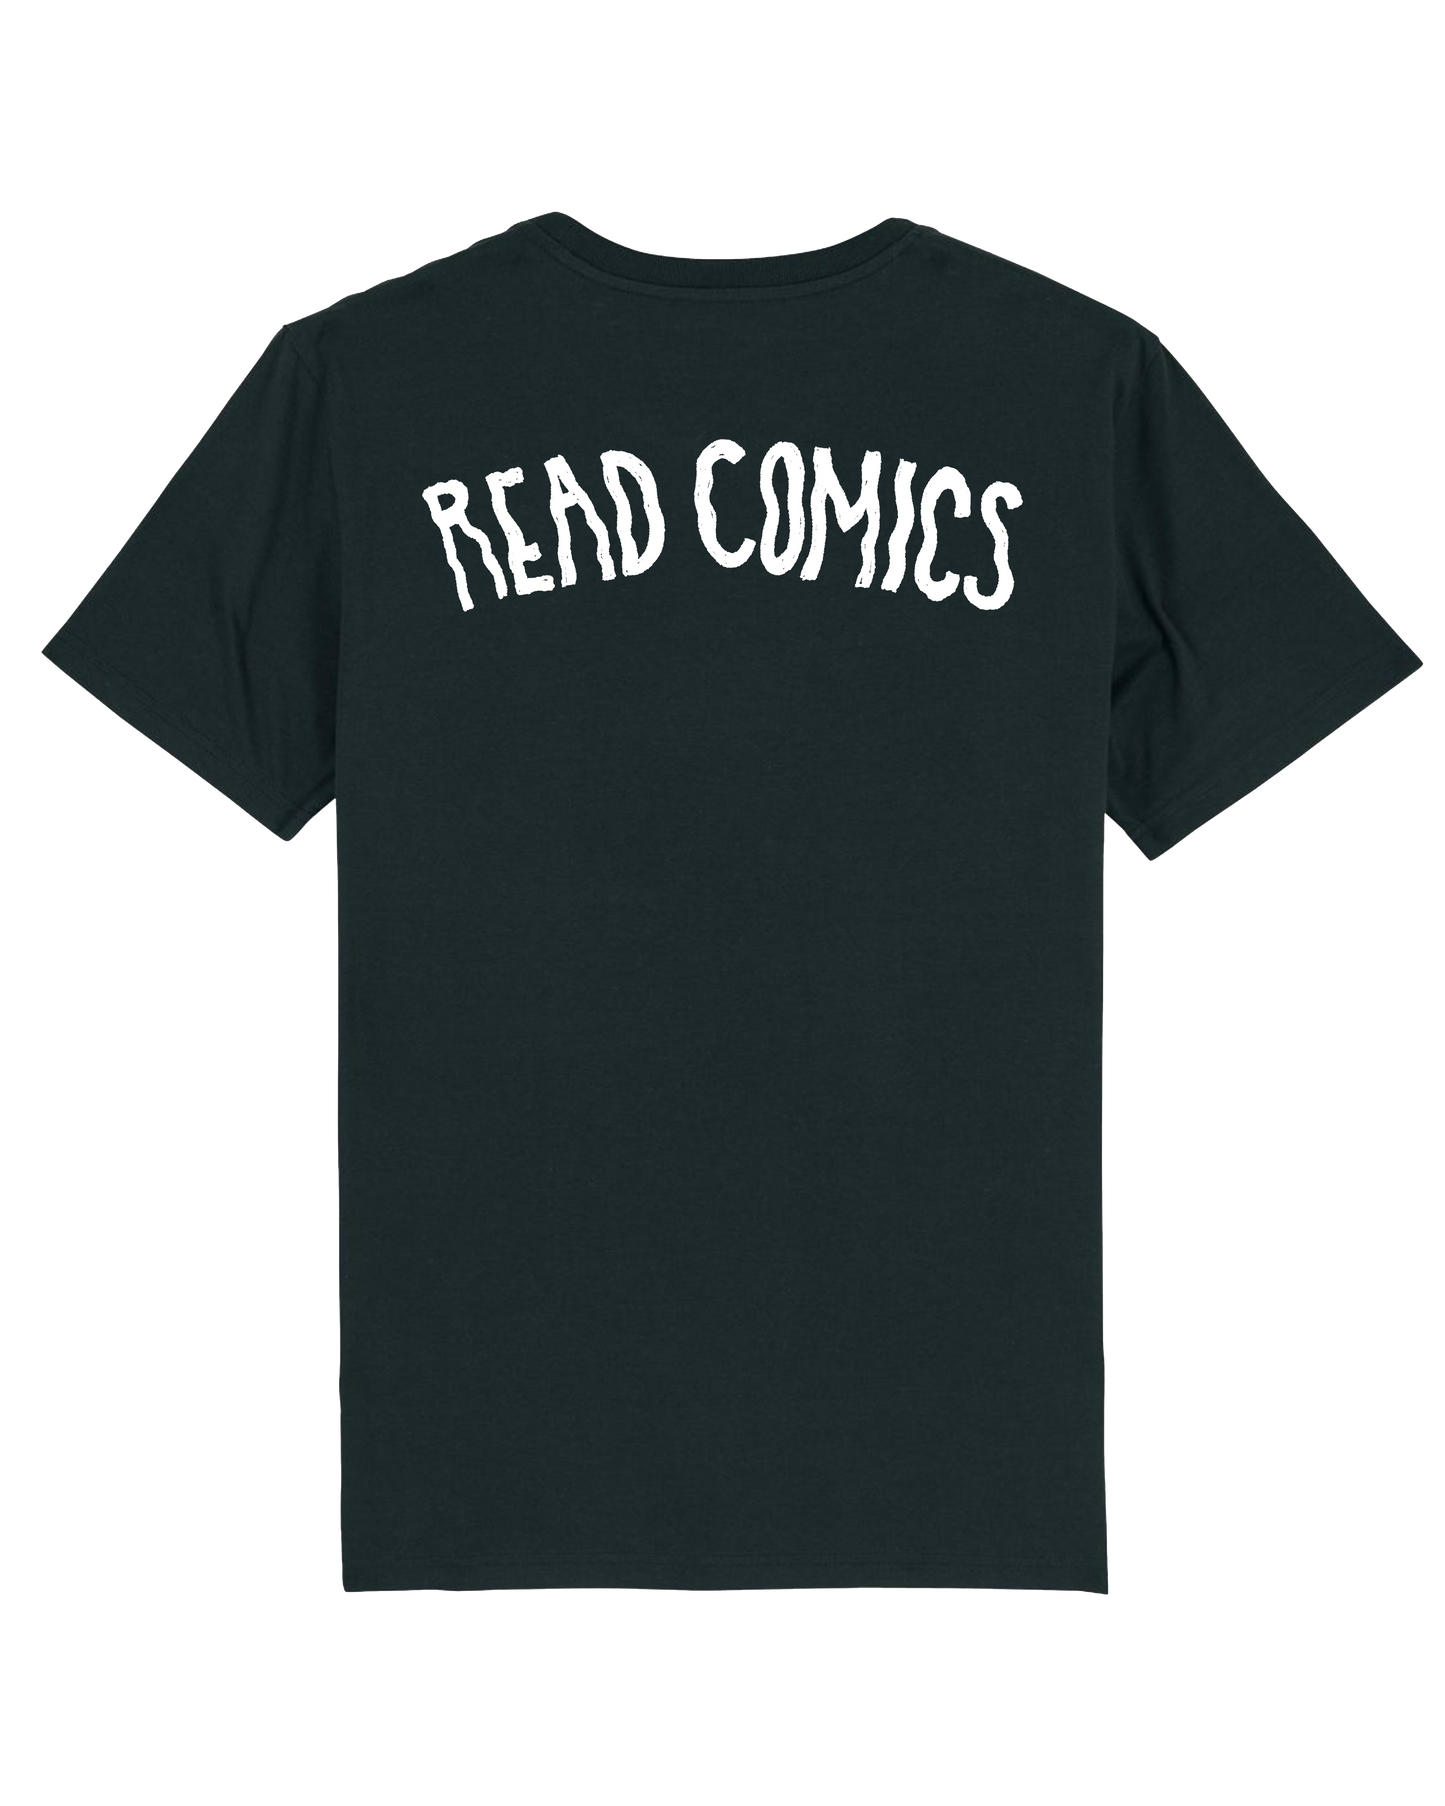 'READ COMICS Black Tee by Official CROM X Thought Bubble